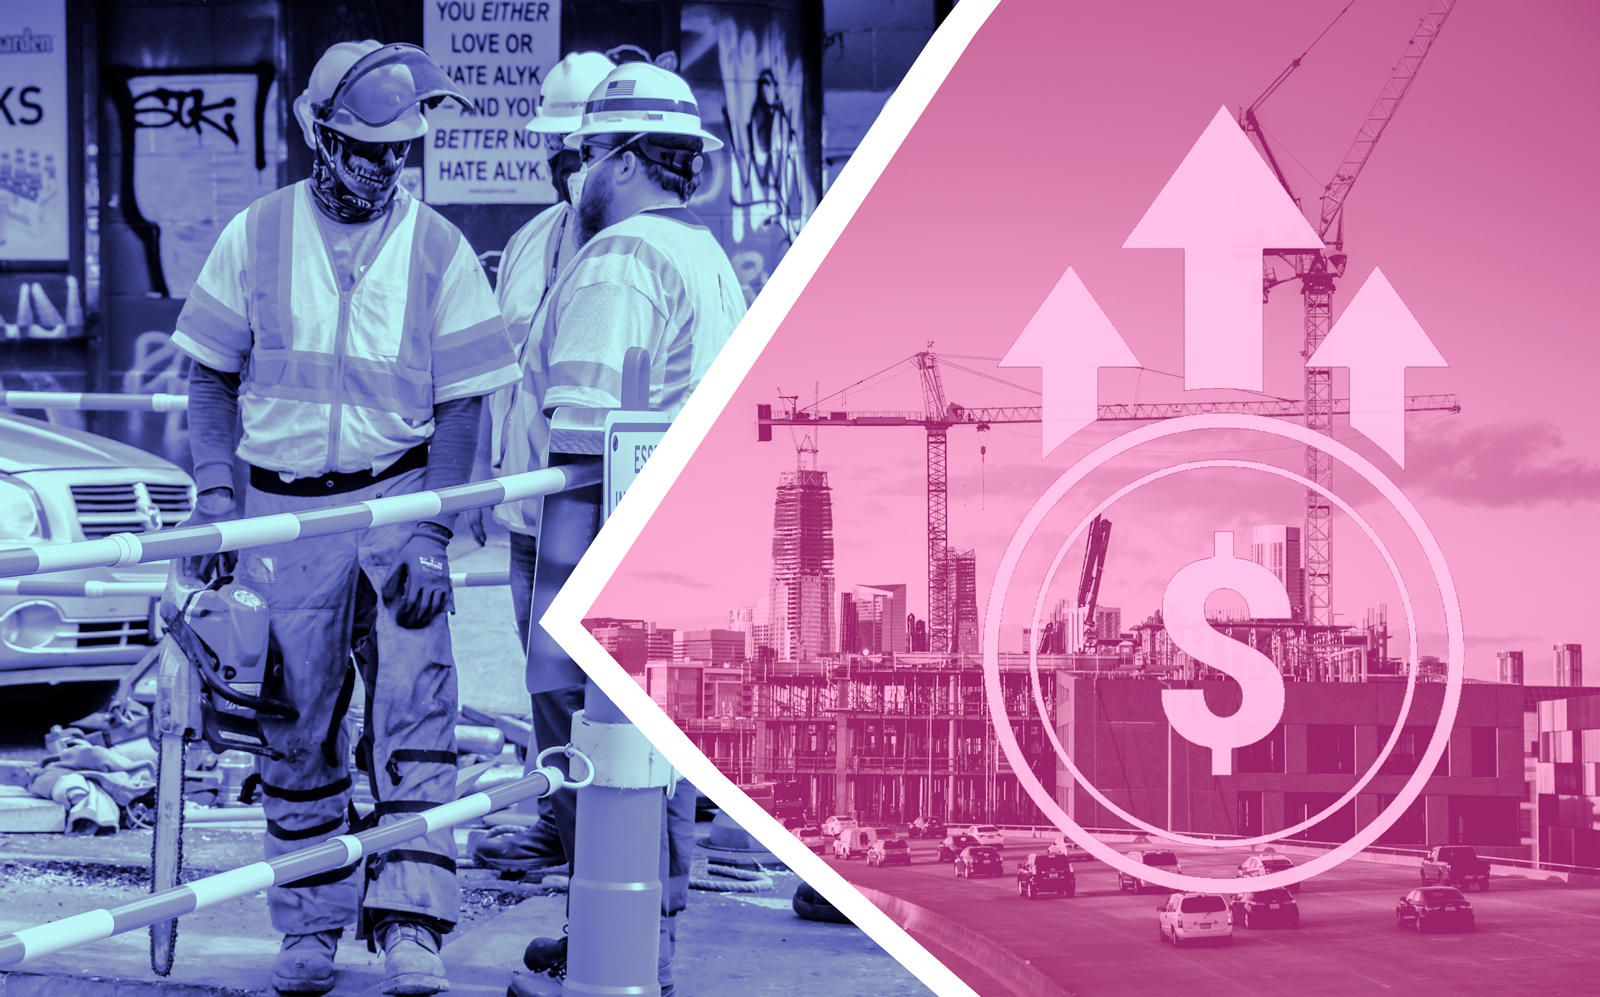 A new report shows that construction costs have kept rising during the pandemic but that unemployment in the industry, which spiked early, has recovered somewhat. (Getty; iStock)